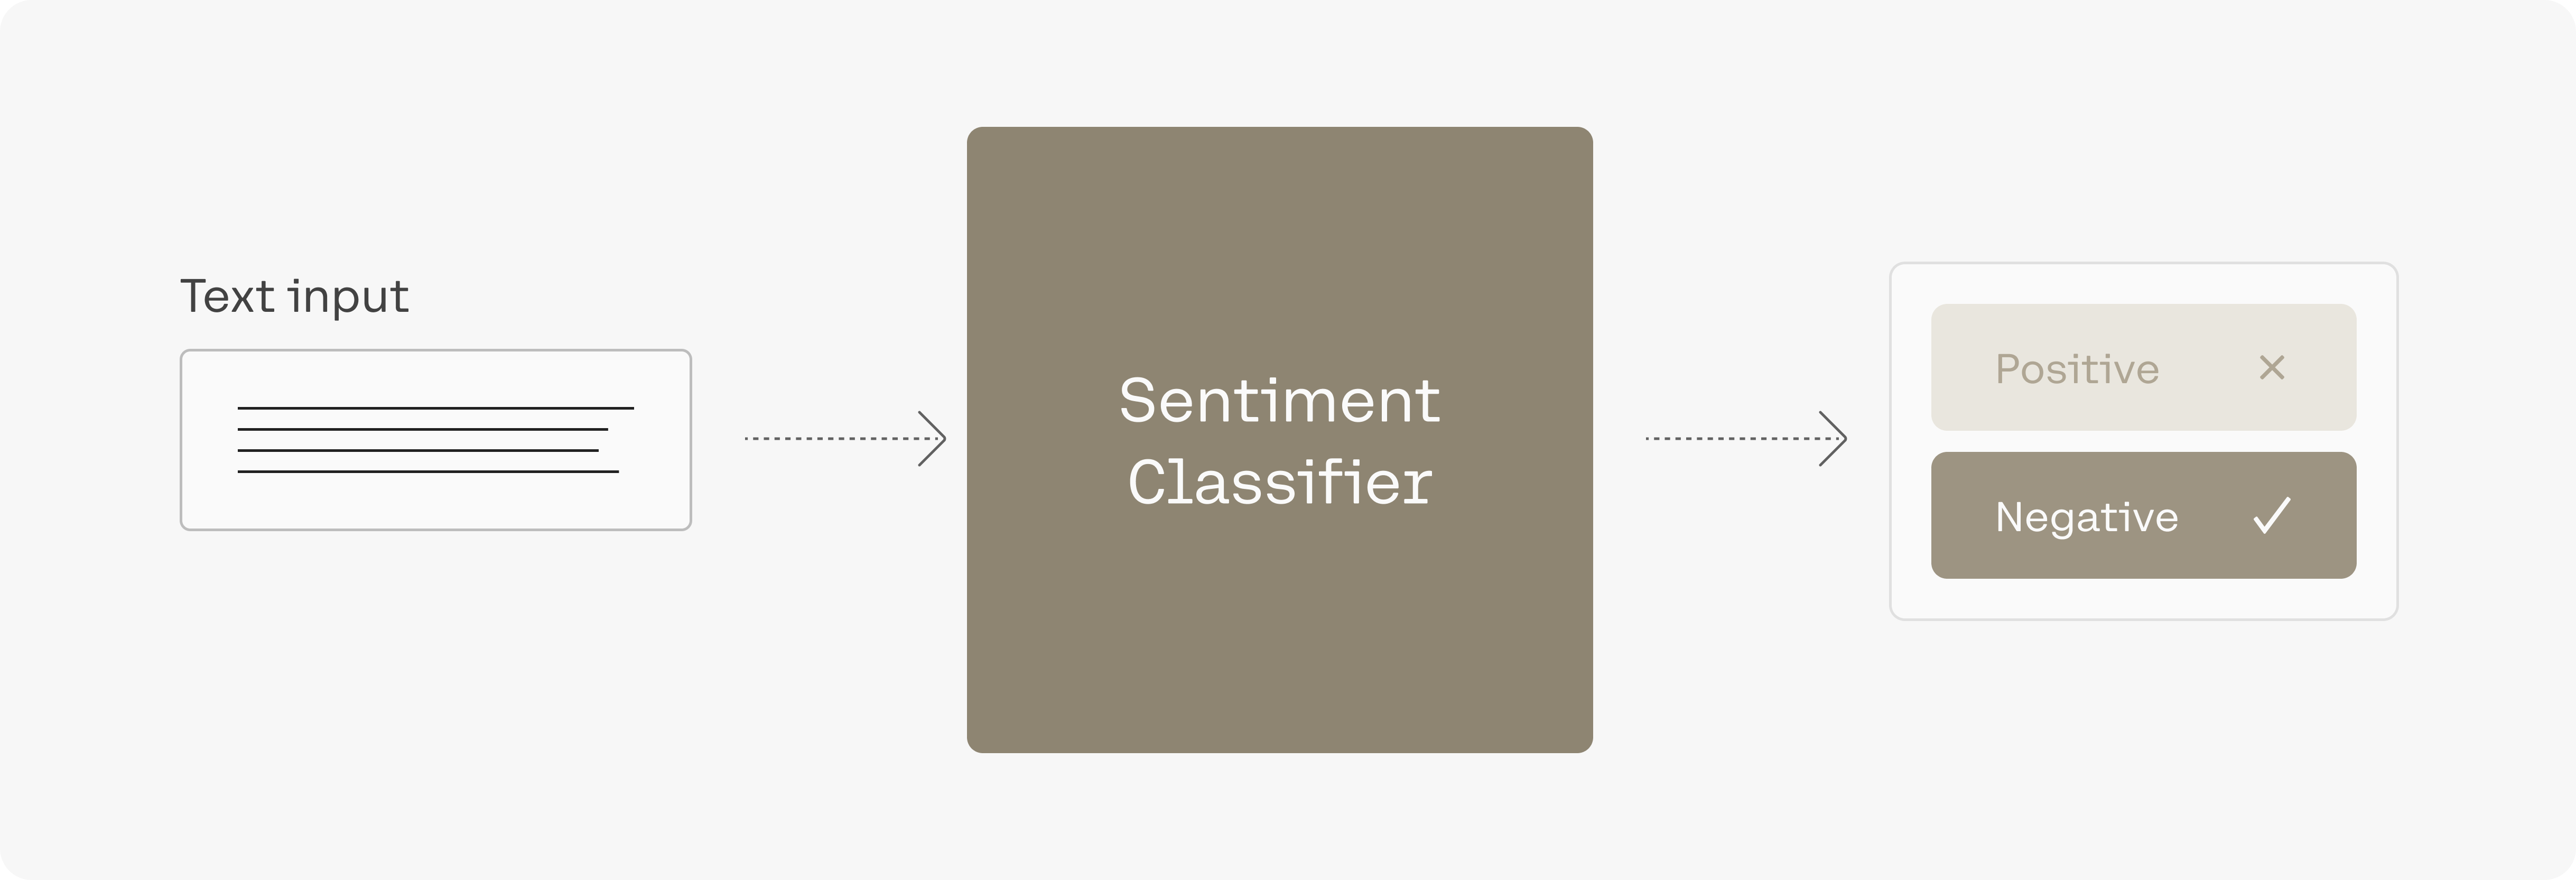 A sentiment classifier assigns a piece of text as either 'positive' or 'negative'.